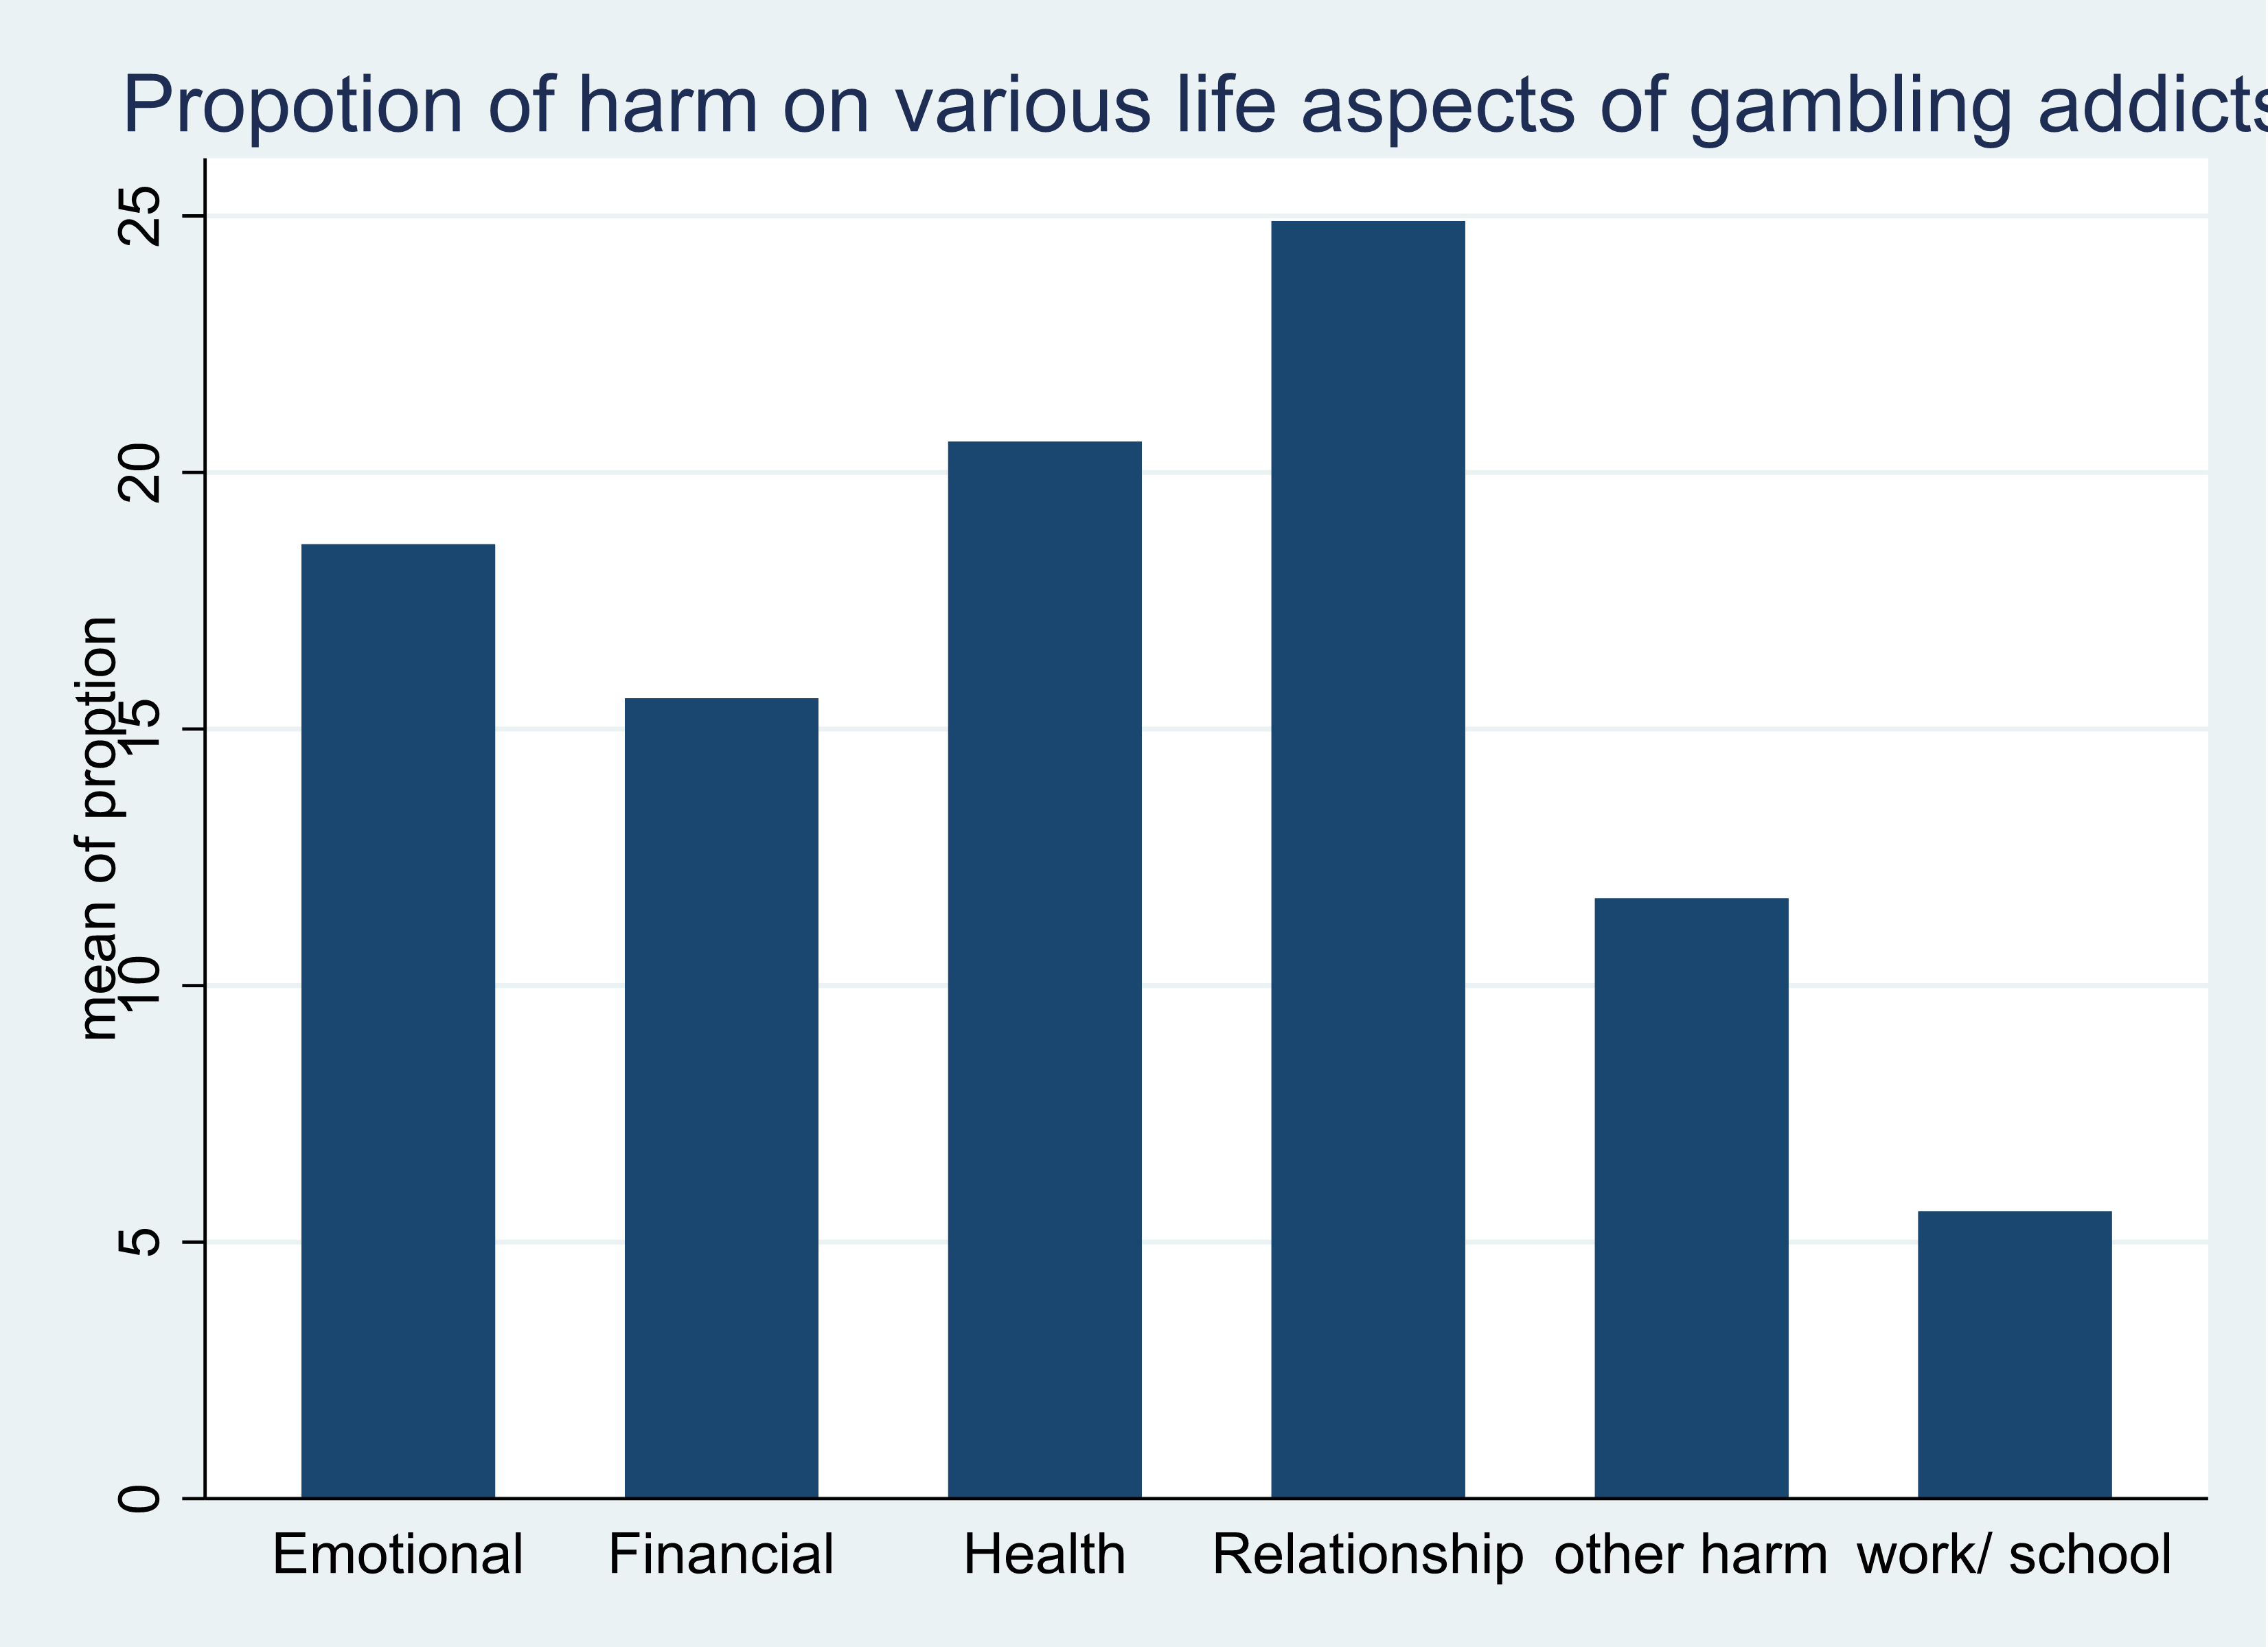 Proportion of harm on various life aspects of gambling addicts 